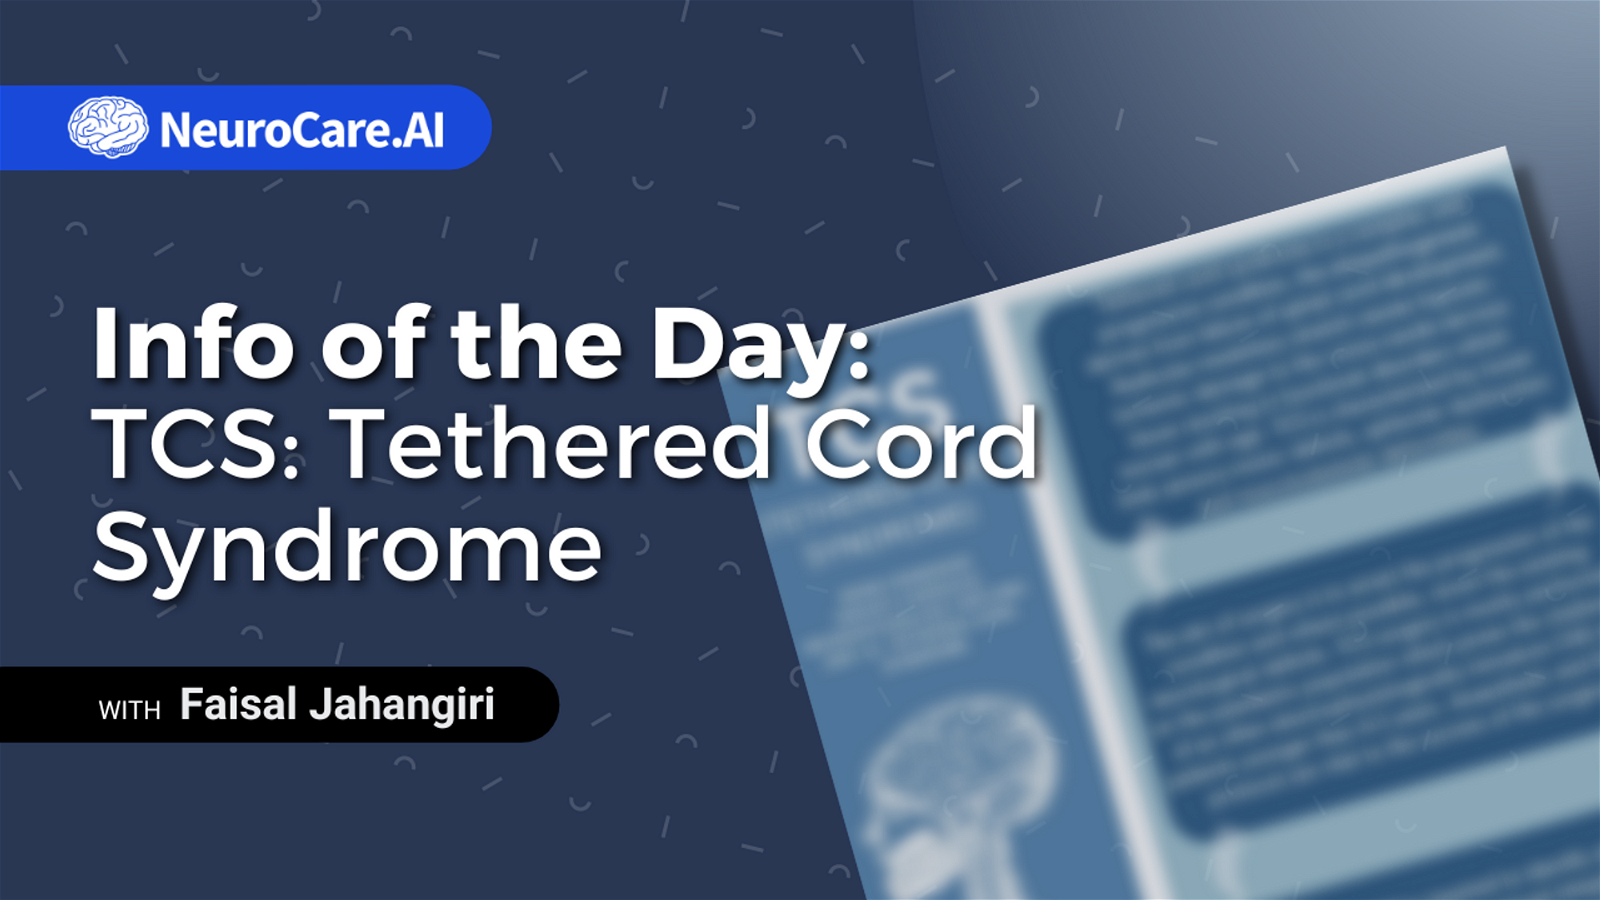 Info of the Day: "TCS: Tethered Cord Syndrome"